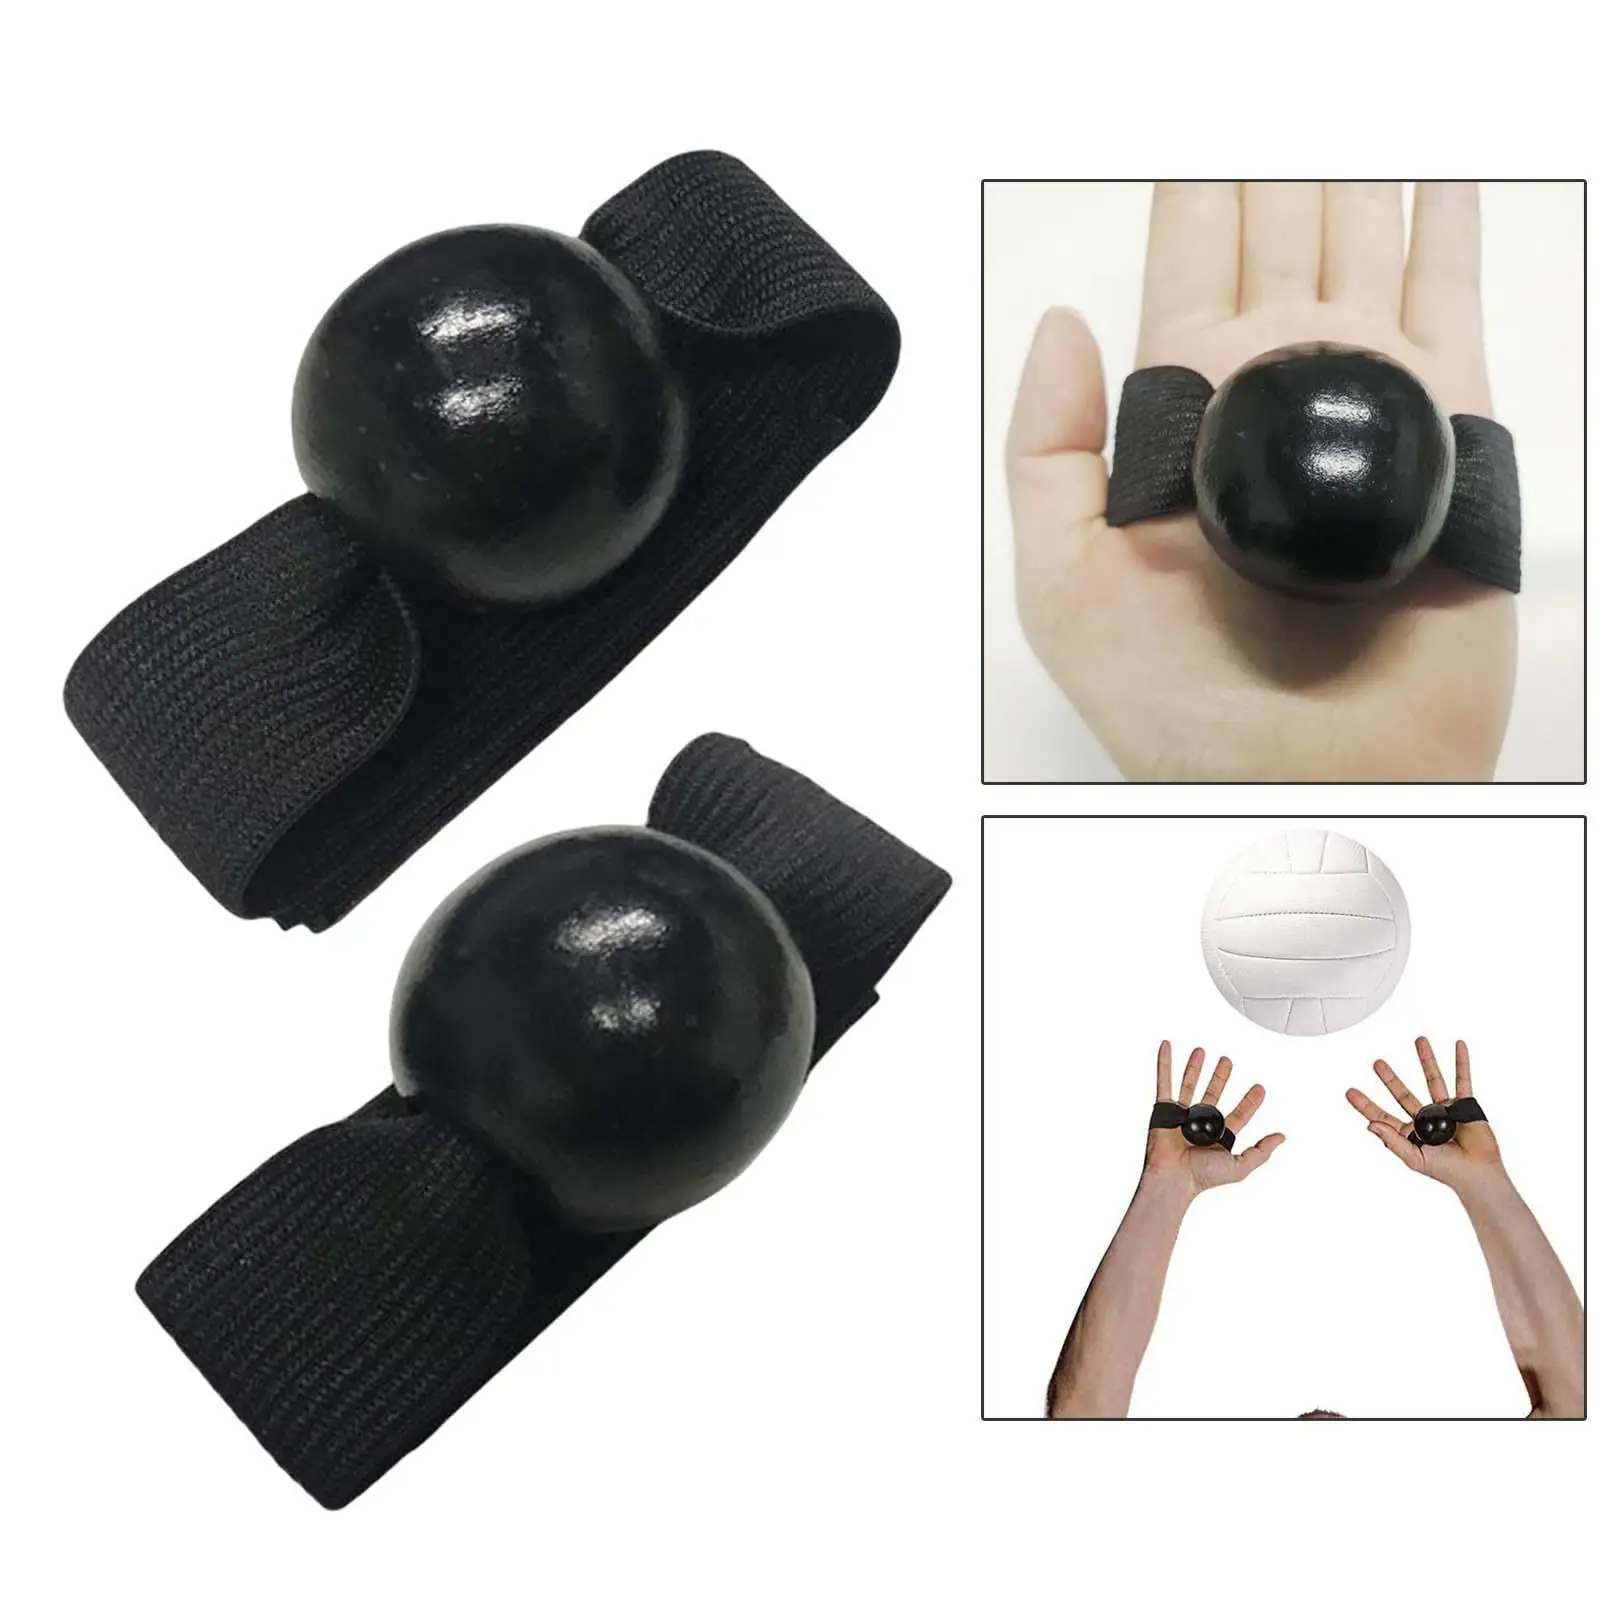 2Pcs Volleyball Setting Technique Training Aid Volleyball Assistant Setter Training with Wood Knobs Palm Hand Practice Strap